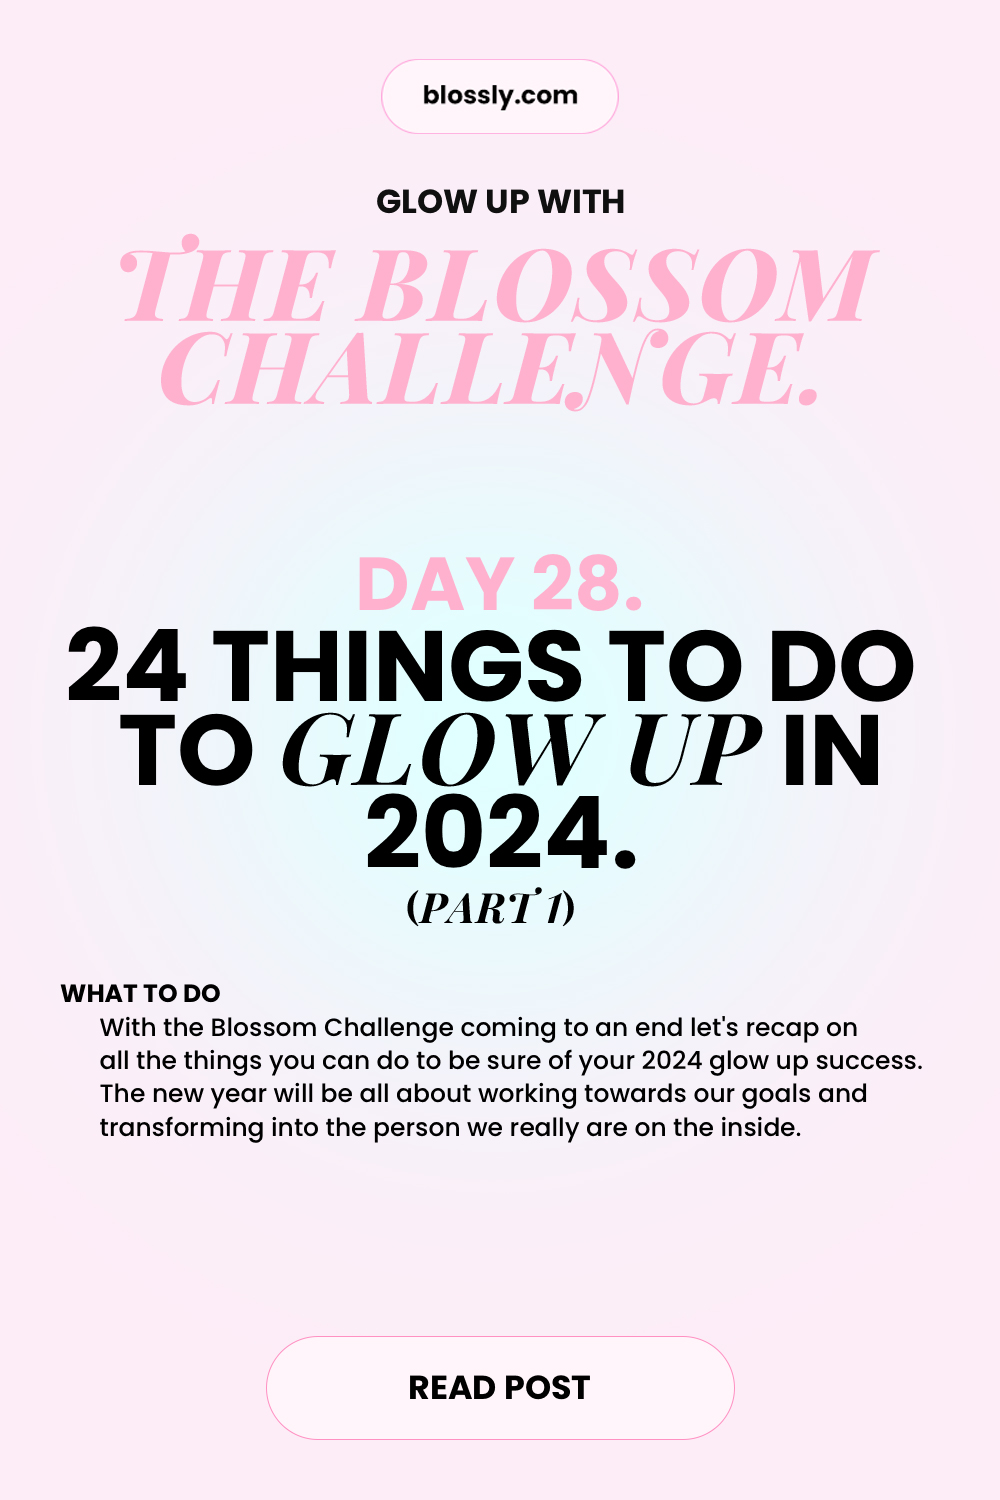 Check out blossomwblossly's Shuffles #healthandwellness #glowup